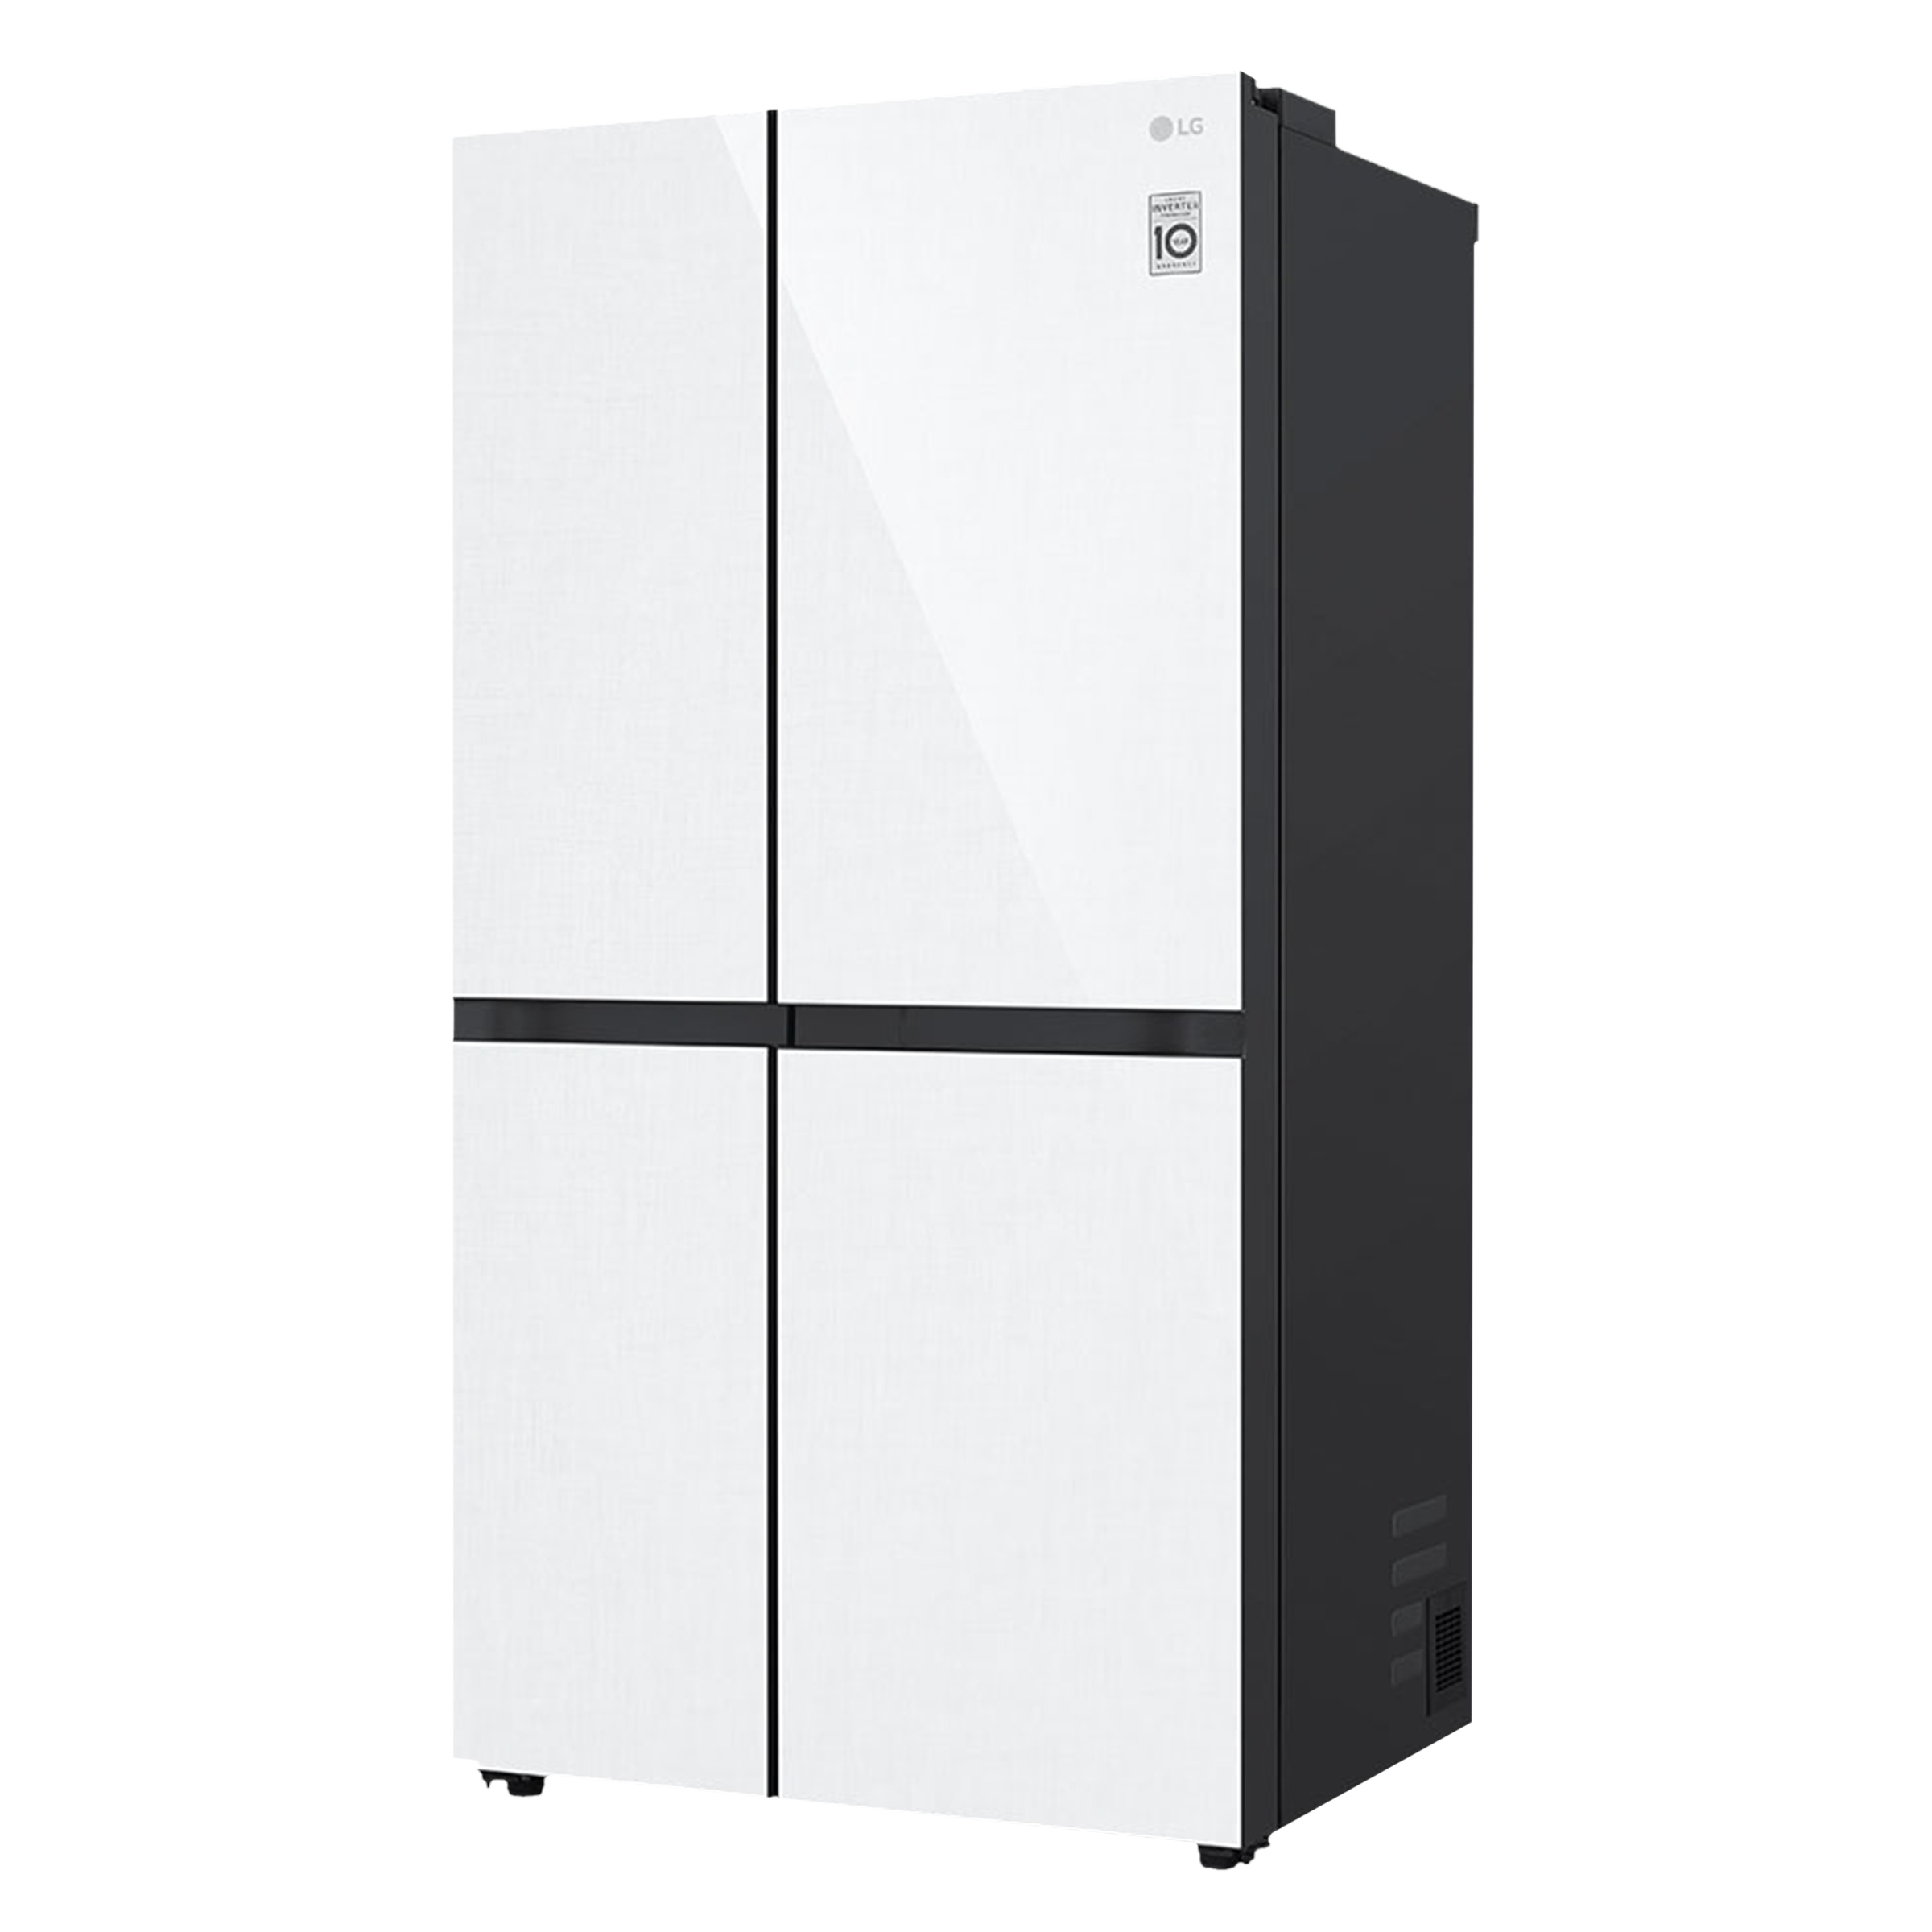 LG 694 Litres Frost Free Side by Side Refrigerator with Multi Air Flow Technology (GC-B257UGLW.ALWQEB, Linen White)_4